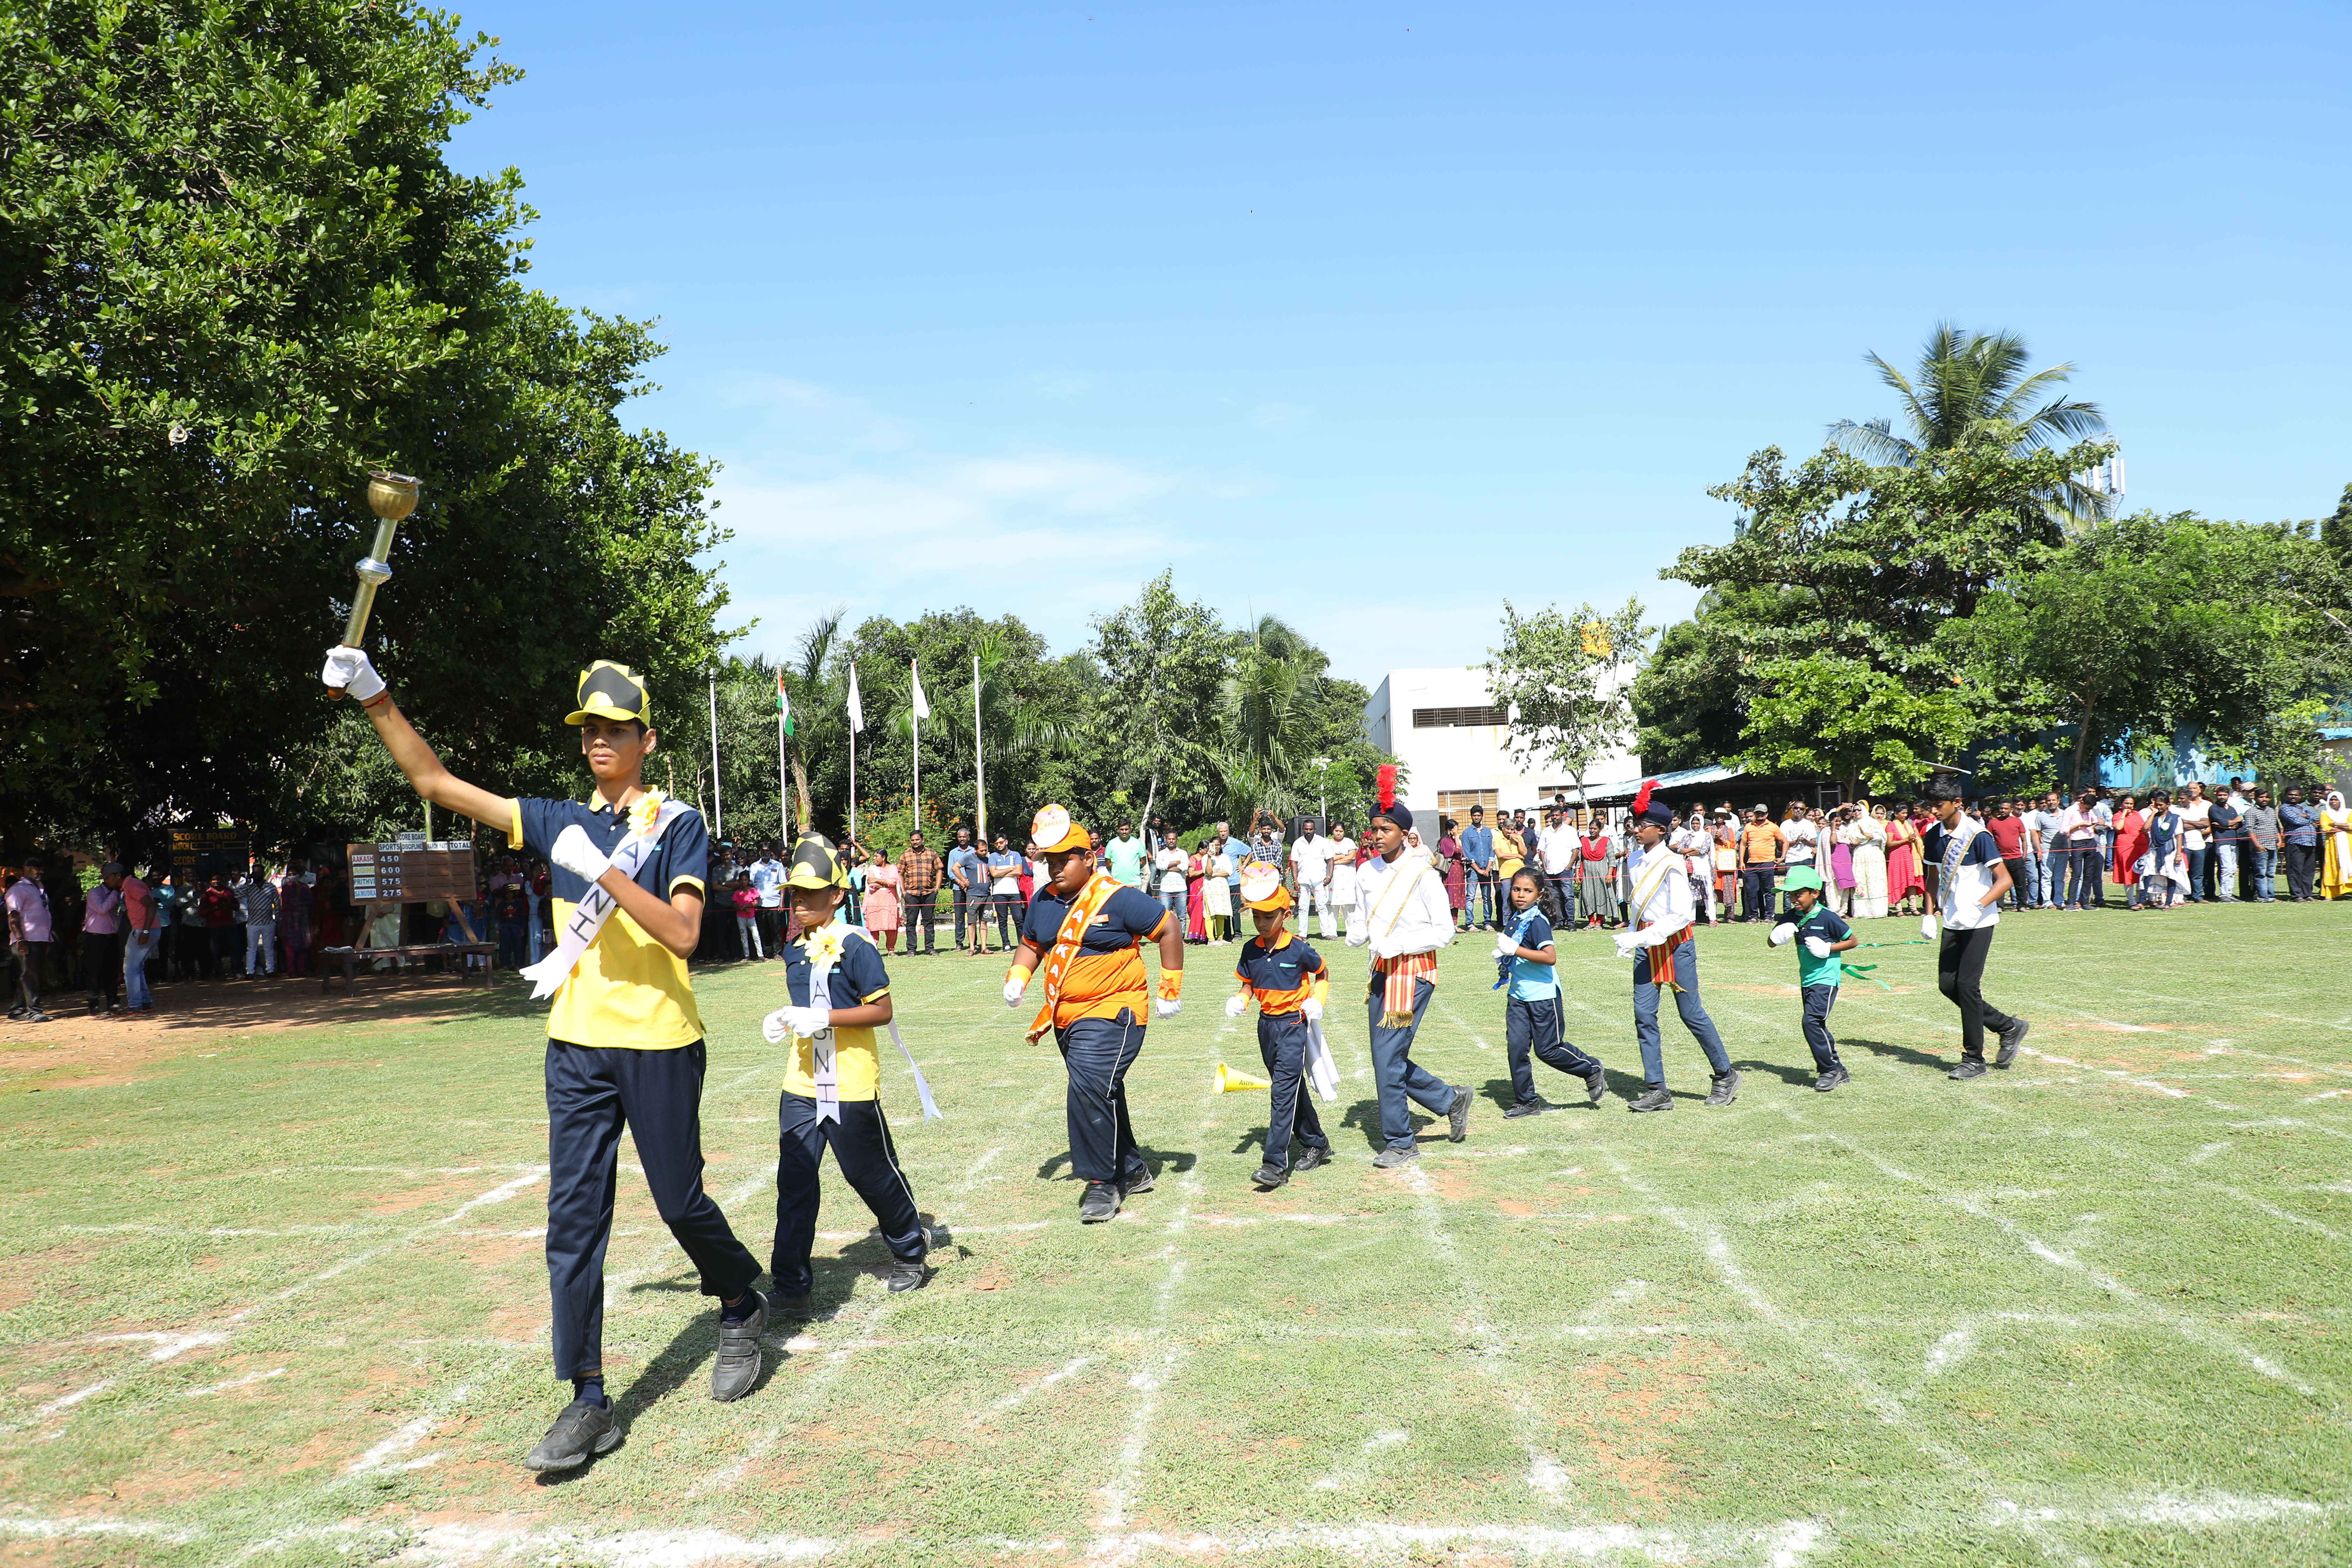 5th ANNUAL SPORTS DAY